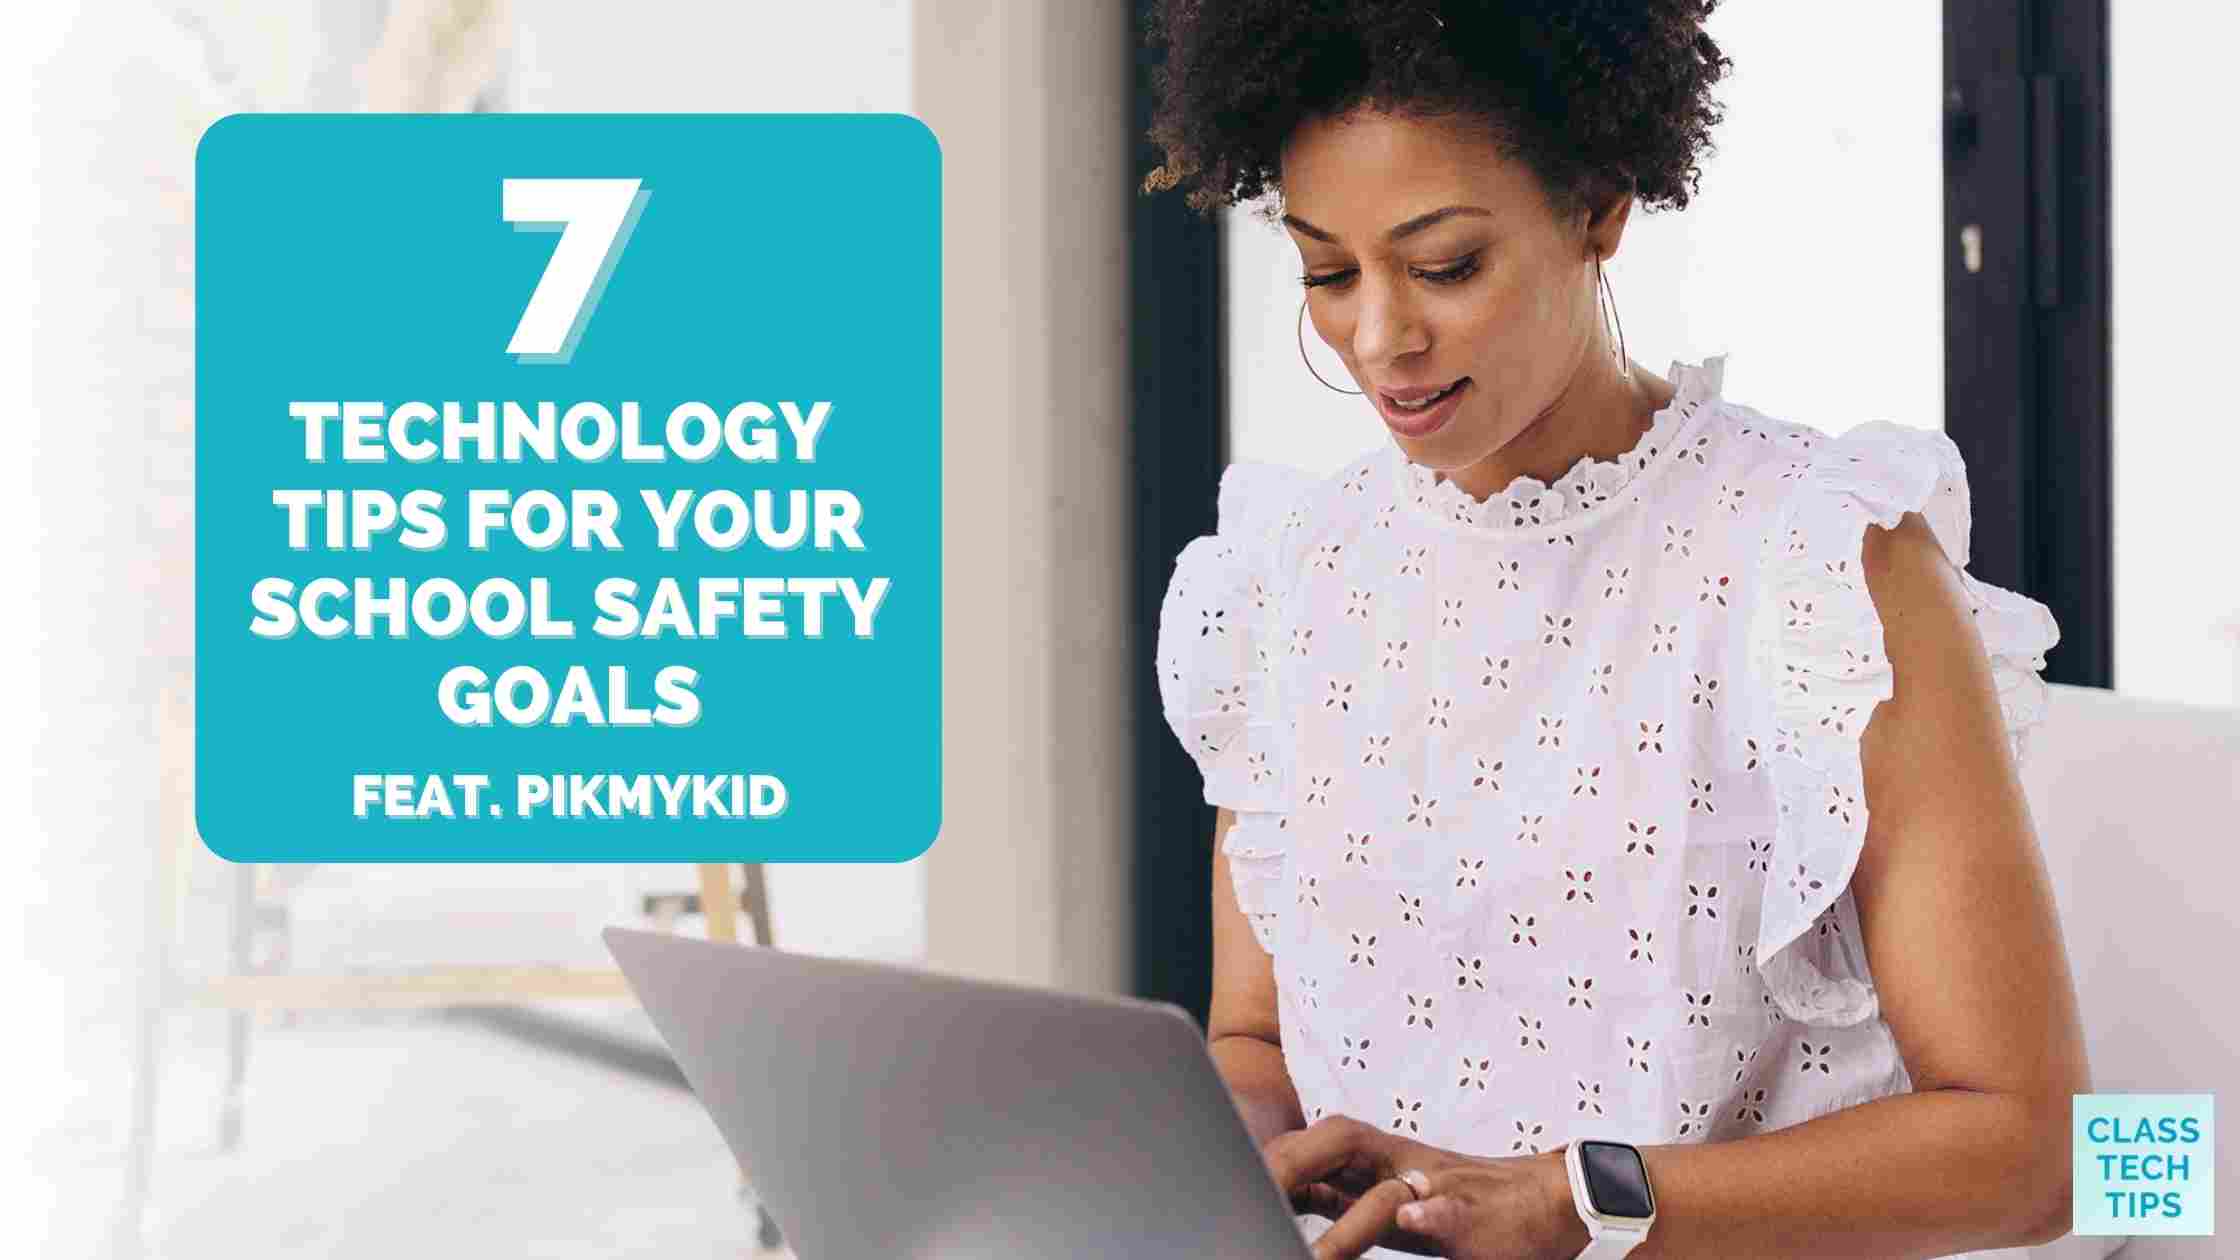 7 Technology Tips for Your School Safety Goals